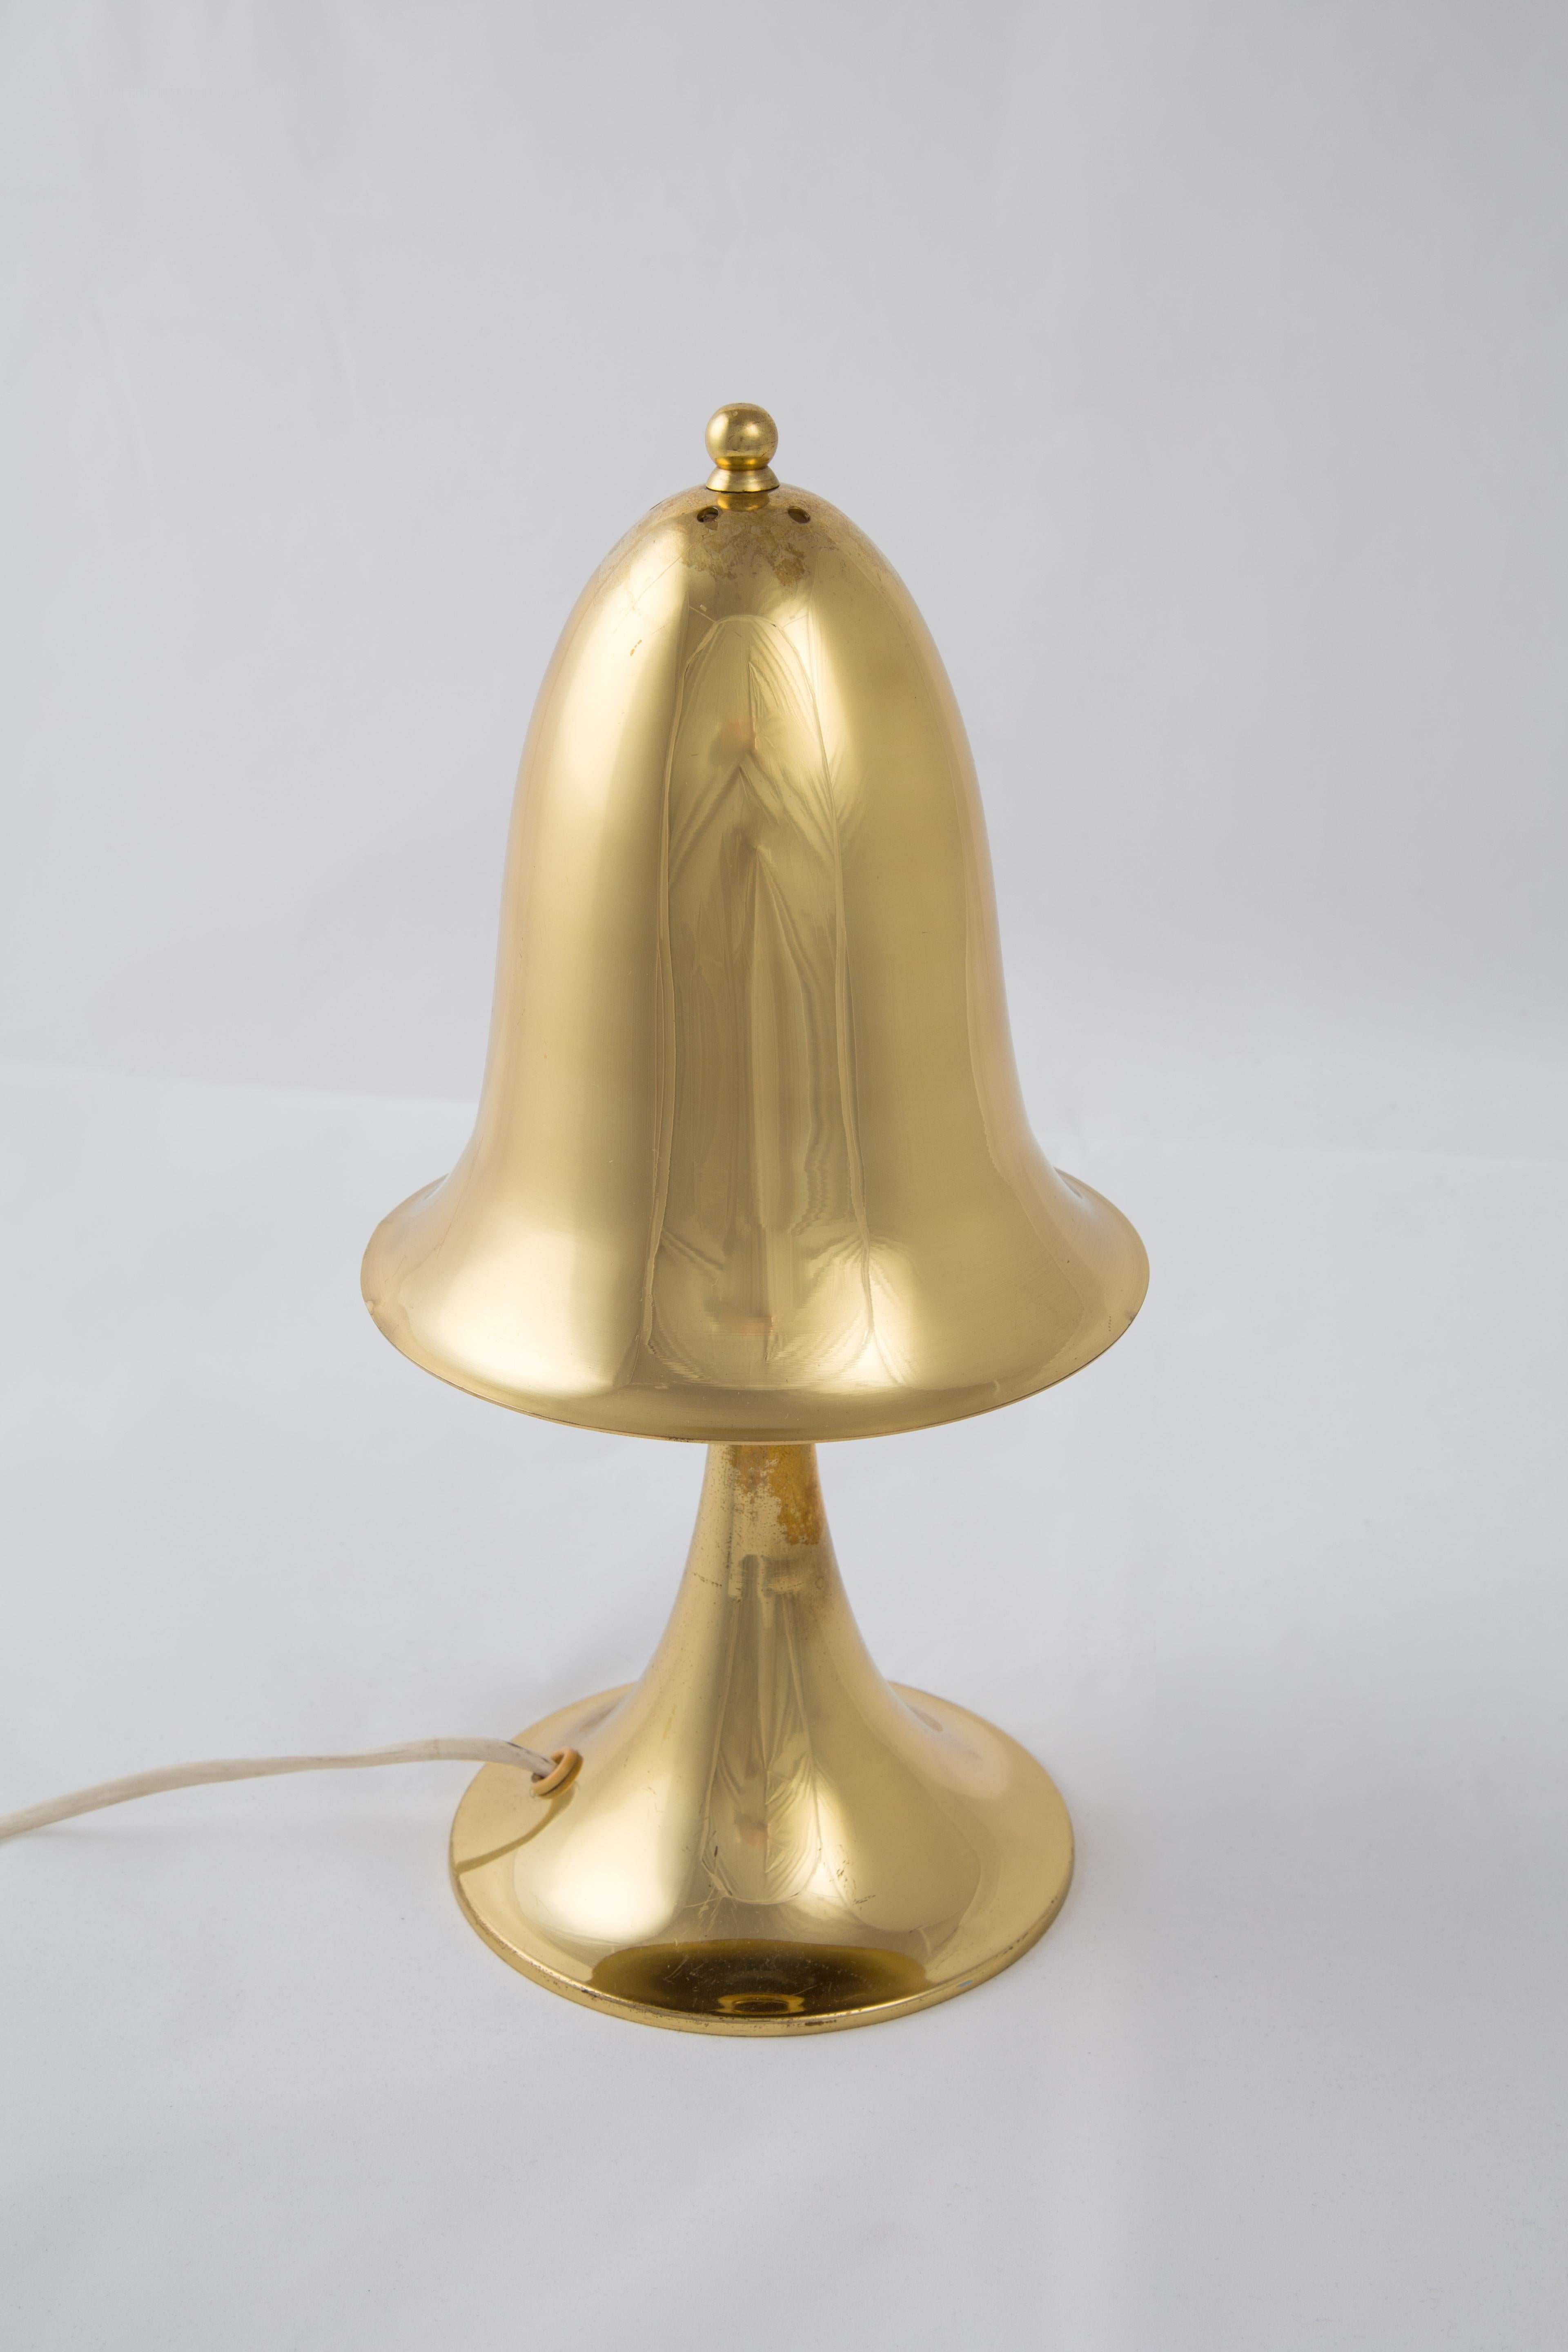 Solve Carlsson Helsingborg brass mushroom lamp. The lamp has the characteristic base of design of Solve Carlsson. It is a fairytale lamp. Perfect shape.
